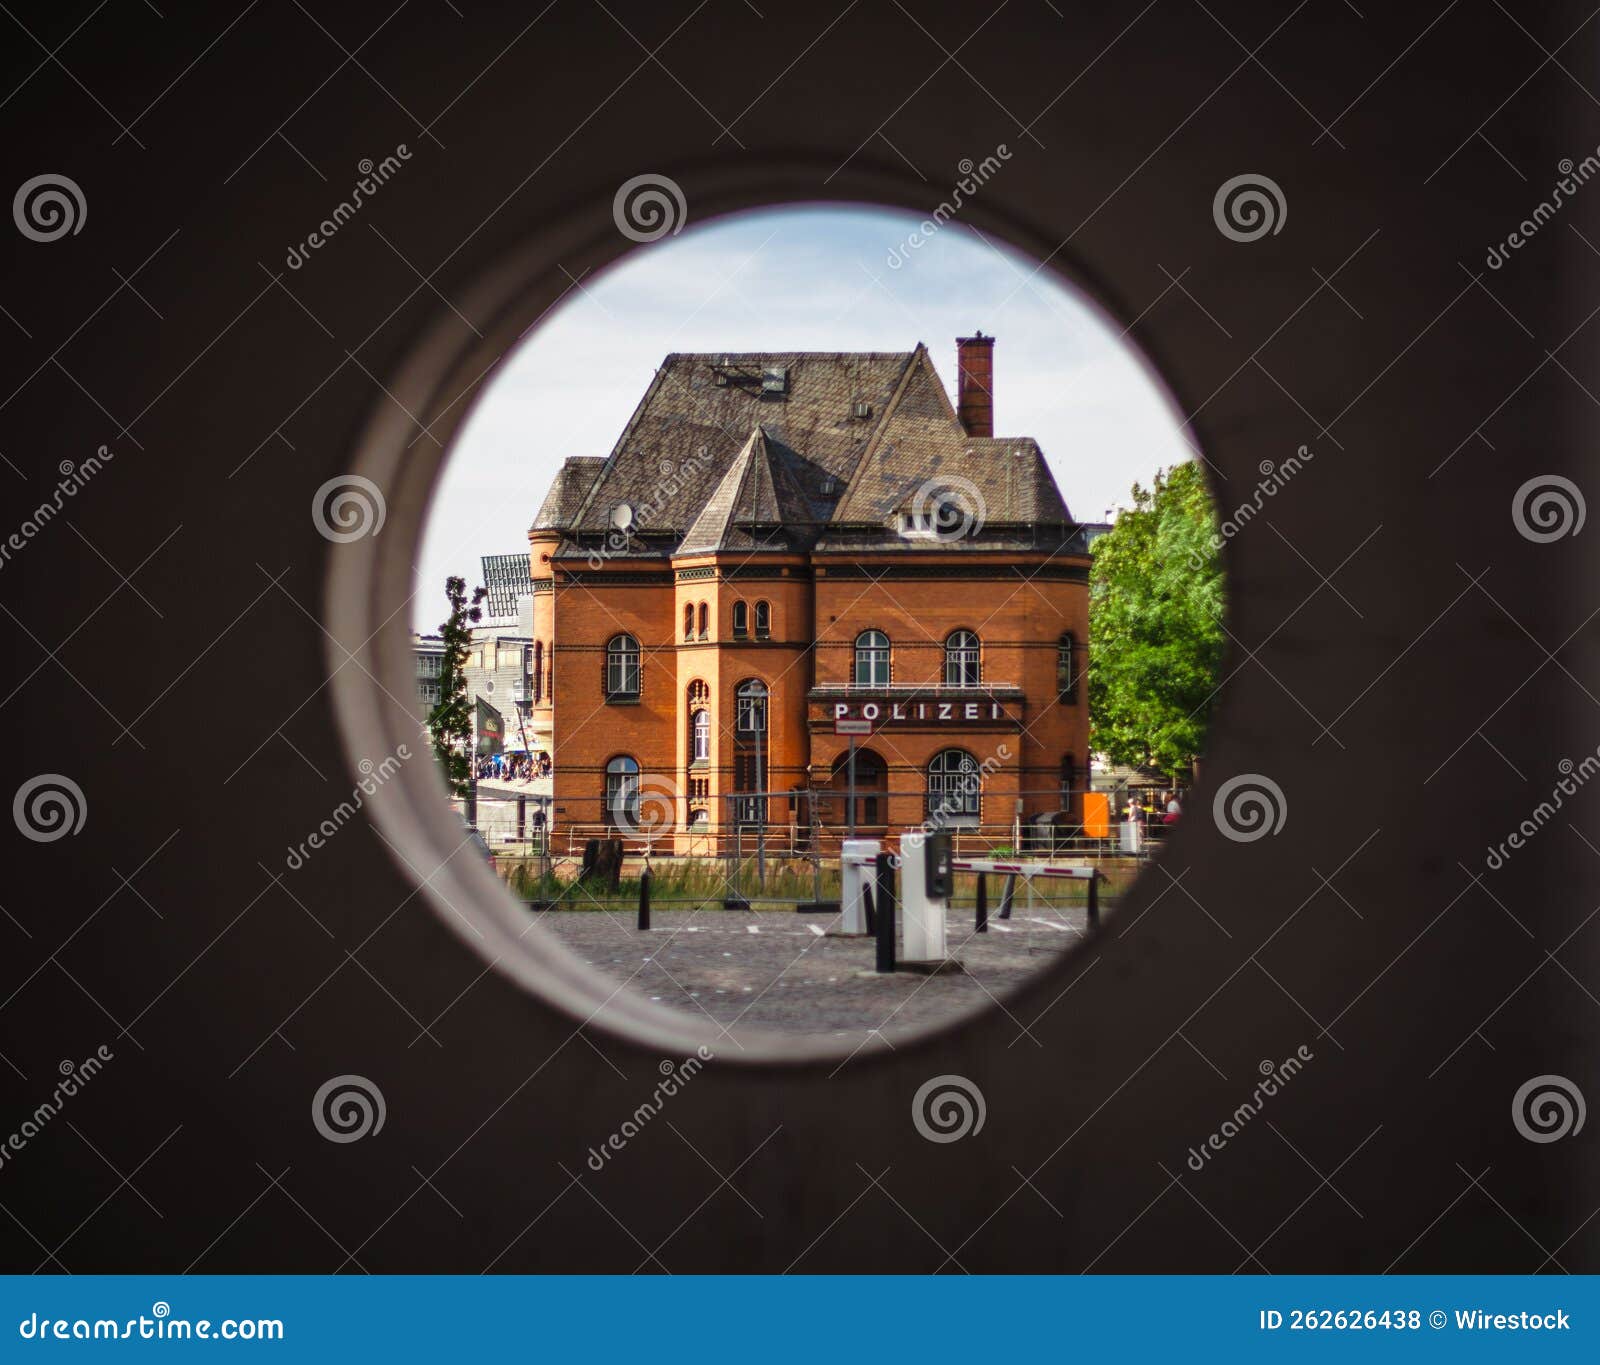 old police building from a hole